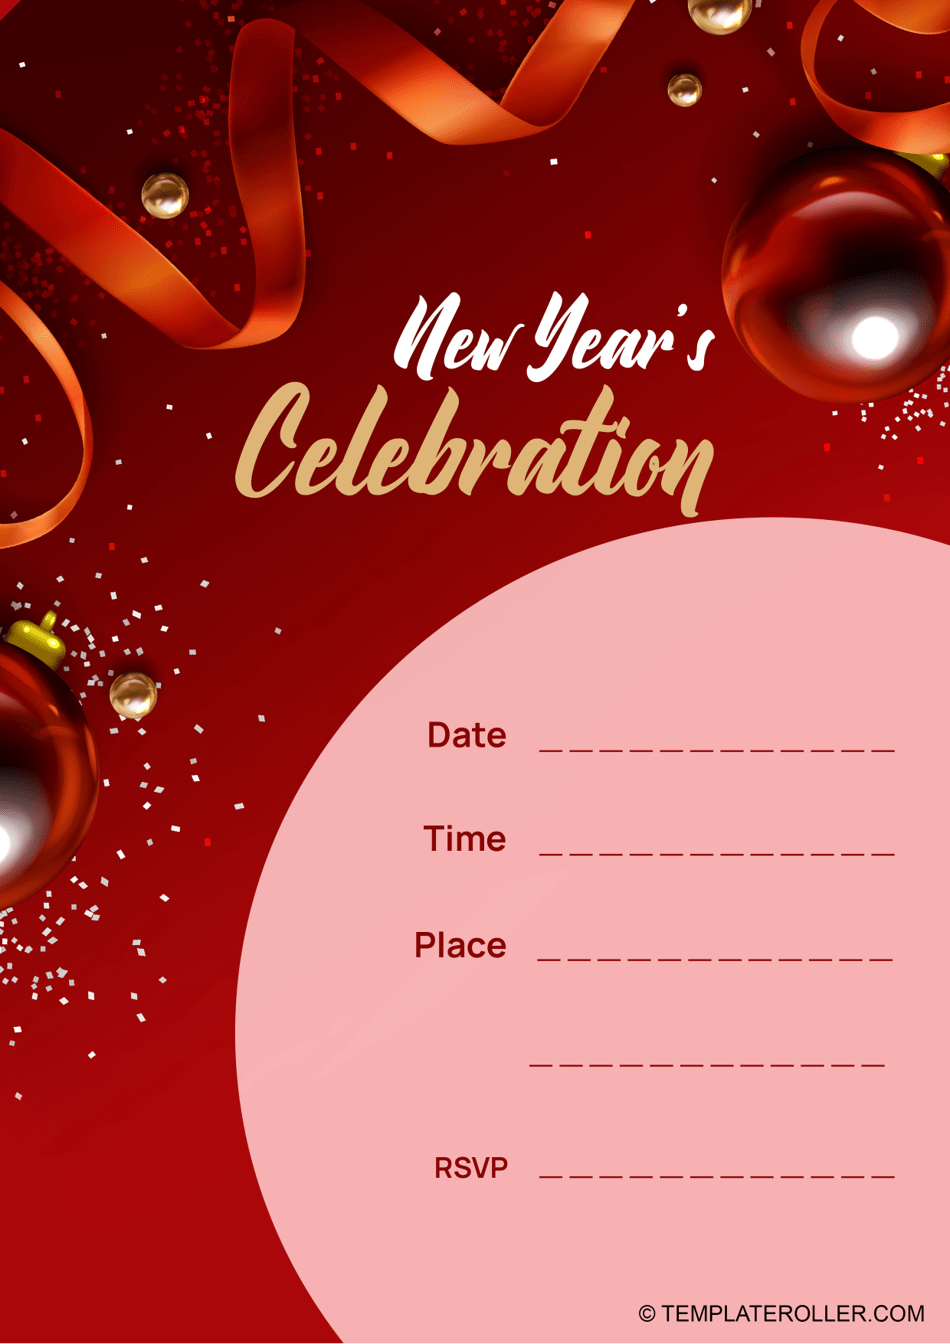 A vibrant and decorative New Year Invitation Template for celebrating the start of the year